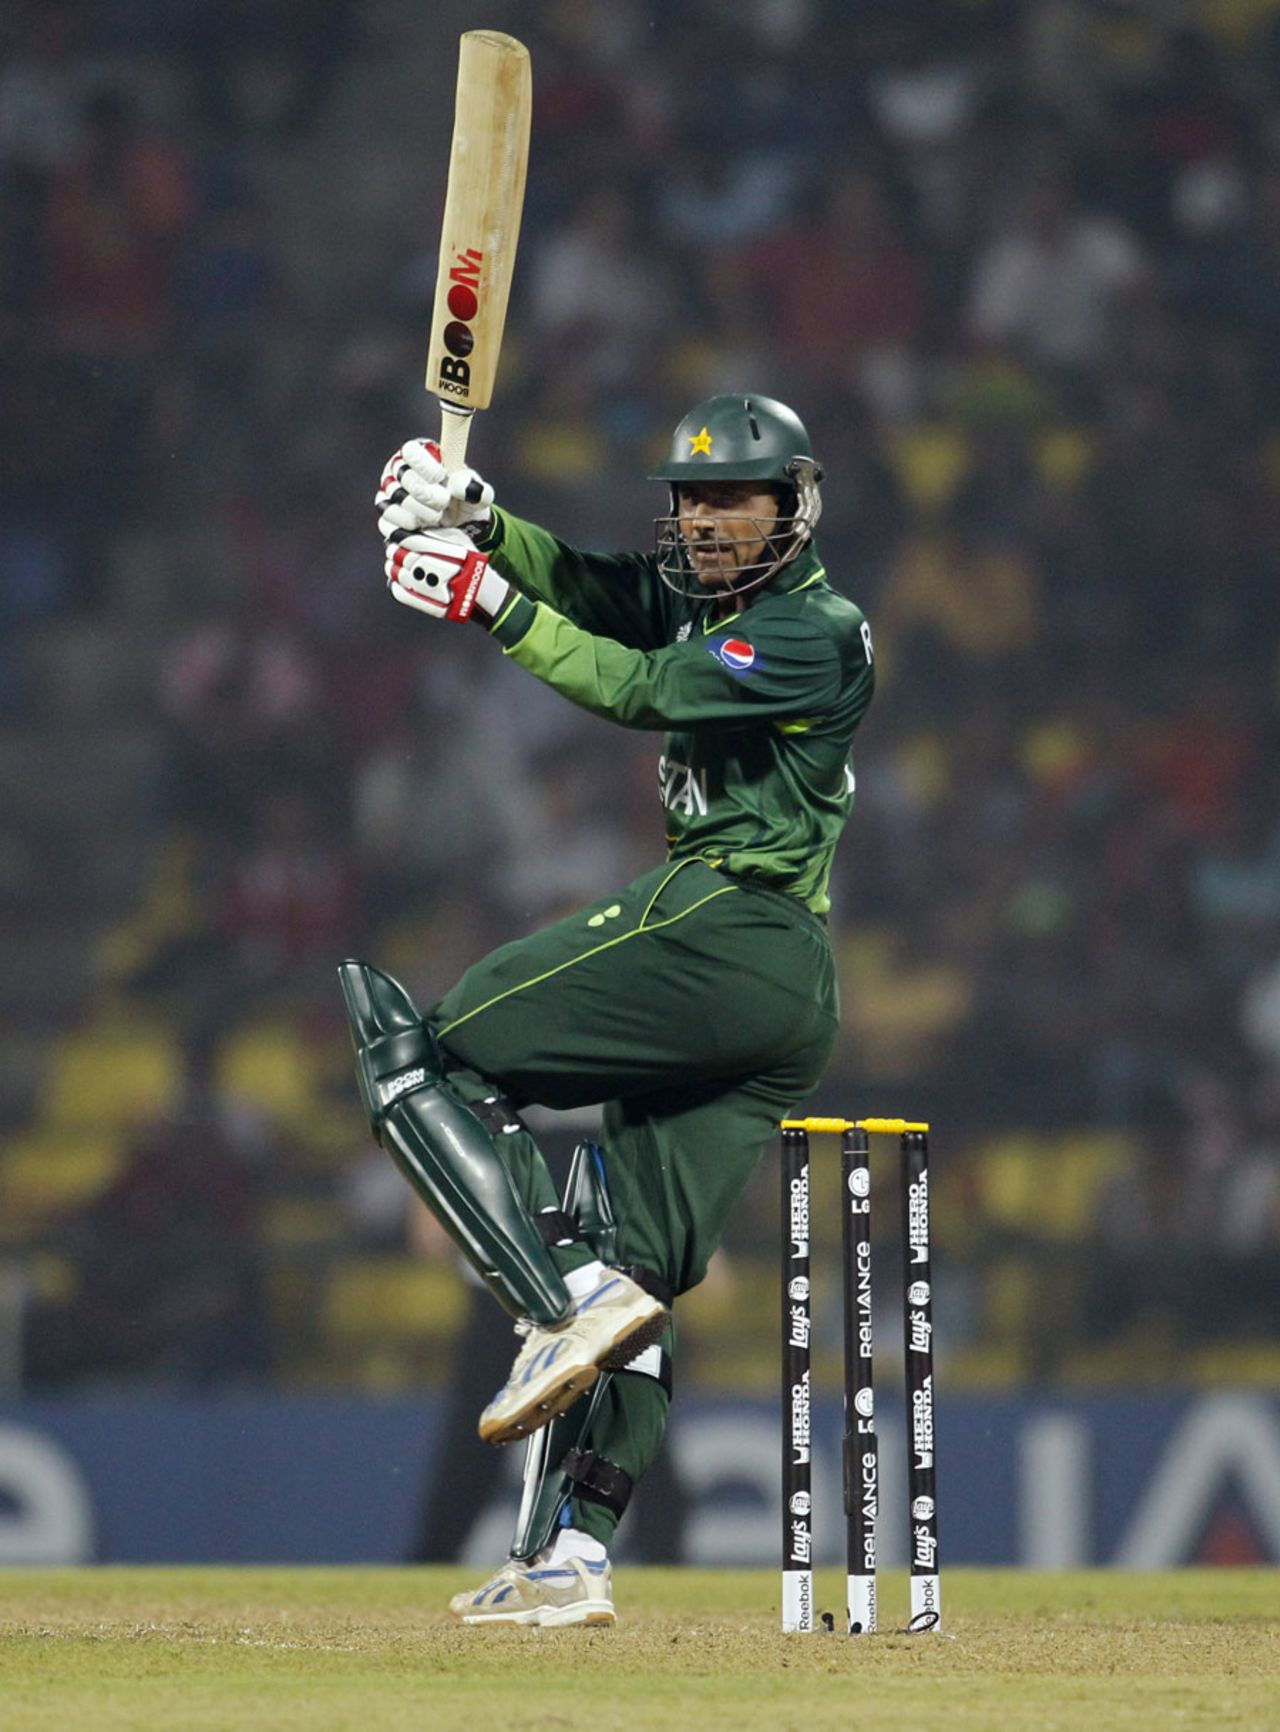 Adul Razzaq plays one behind square on the leg side, New Zealand v Pakistan, Group A, World Cup, Pallekele, March 8, 2011